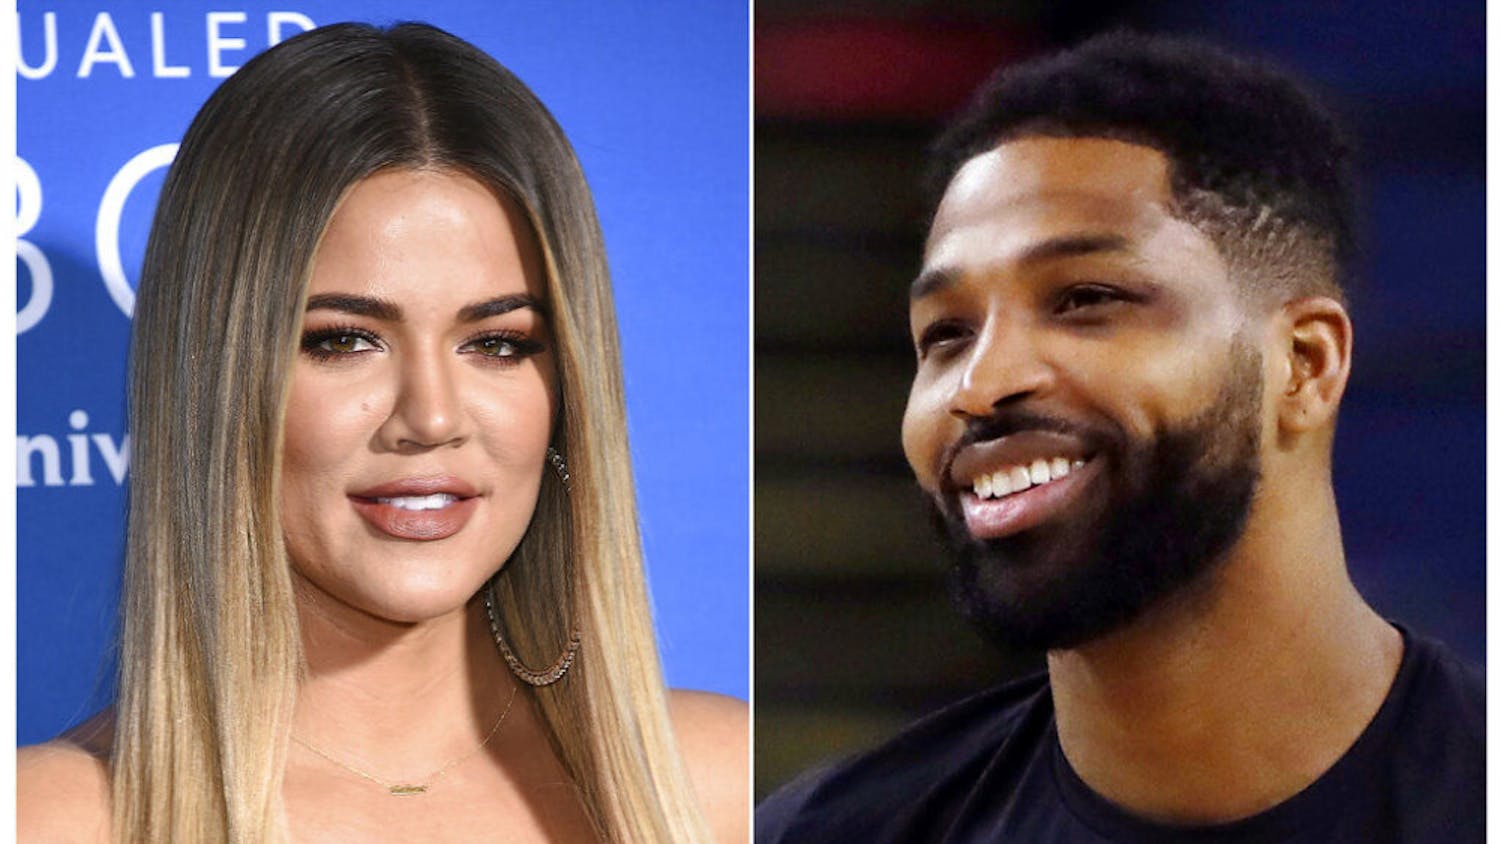 This combination photo shows TV personality Khloe Kardashian at the NBCUniversal Network 2017 Upfront in New York on May 15, 2017, left, and Cleveland Cavaliers' Tristan Thompson during an NBA basketball practice in Oakland, Calif., on May 30, 2018. Kardashian and Thompson have a nearly one-year-old daughter named True. (AP Photo)